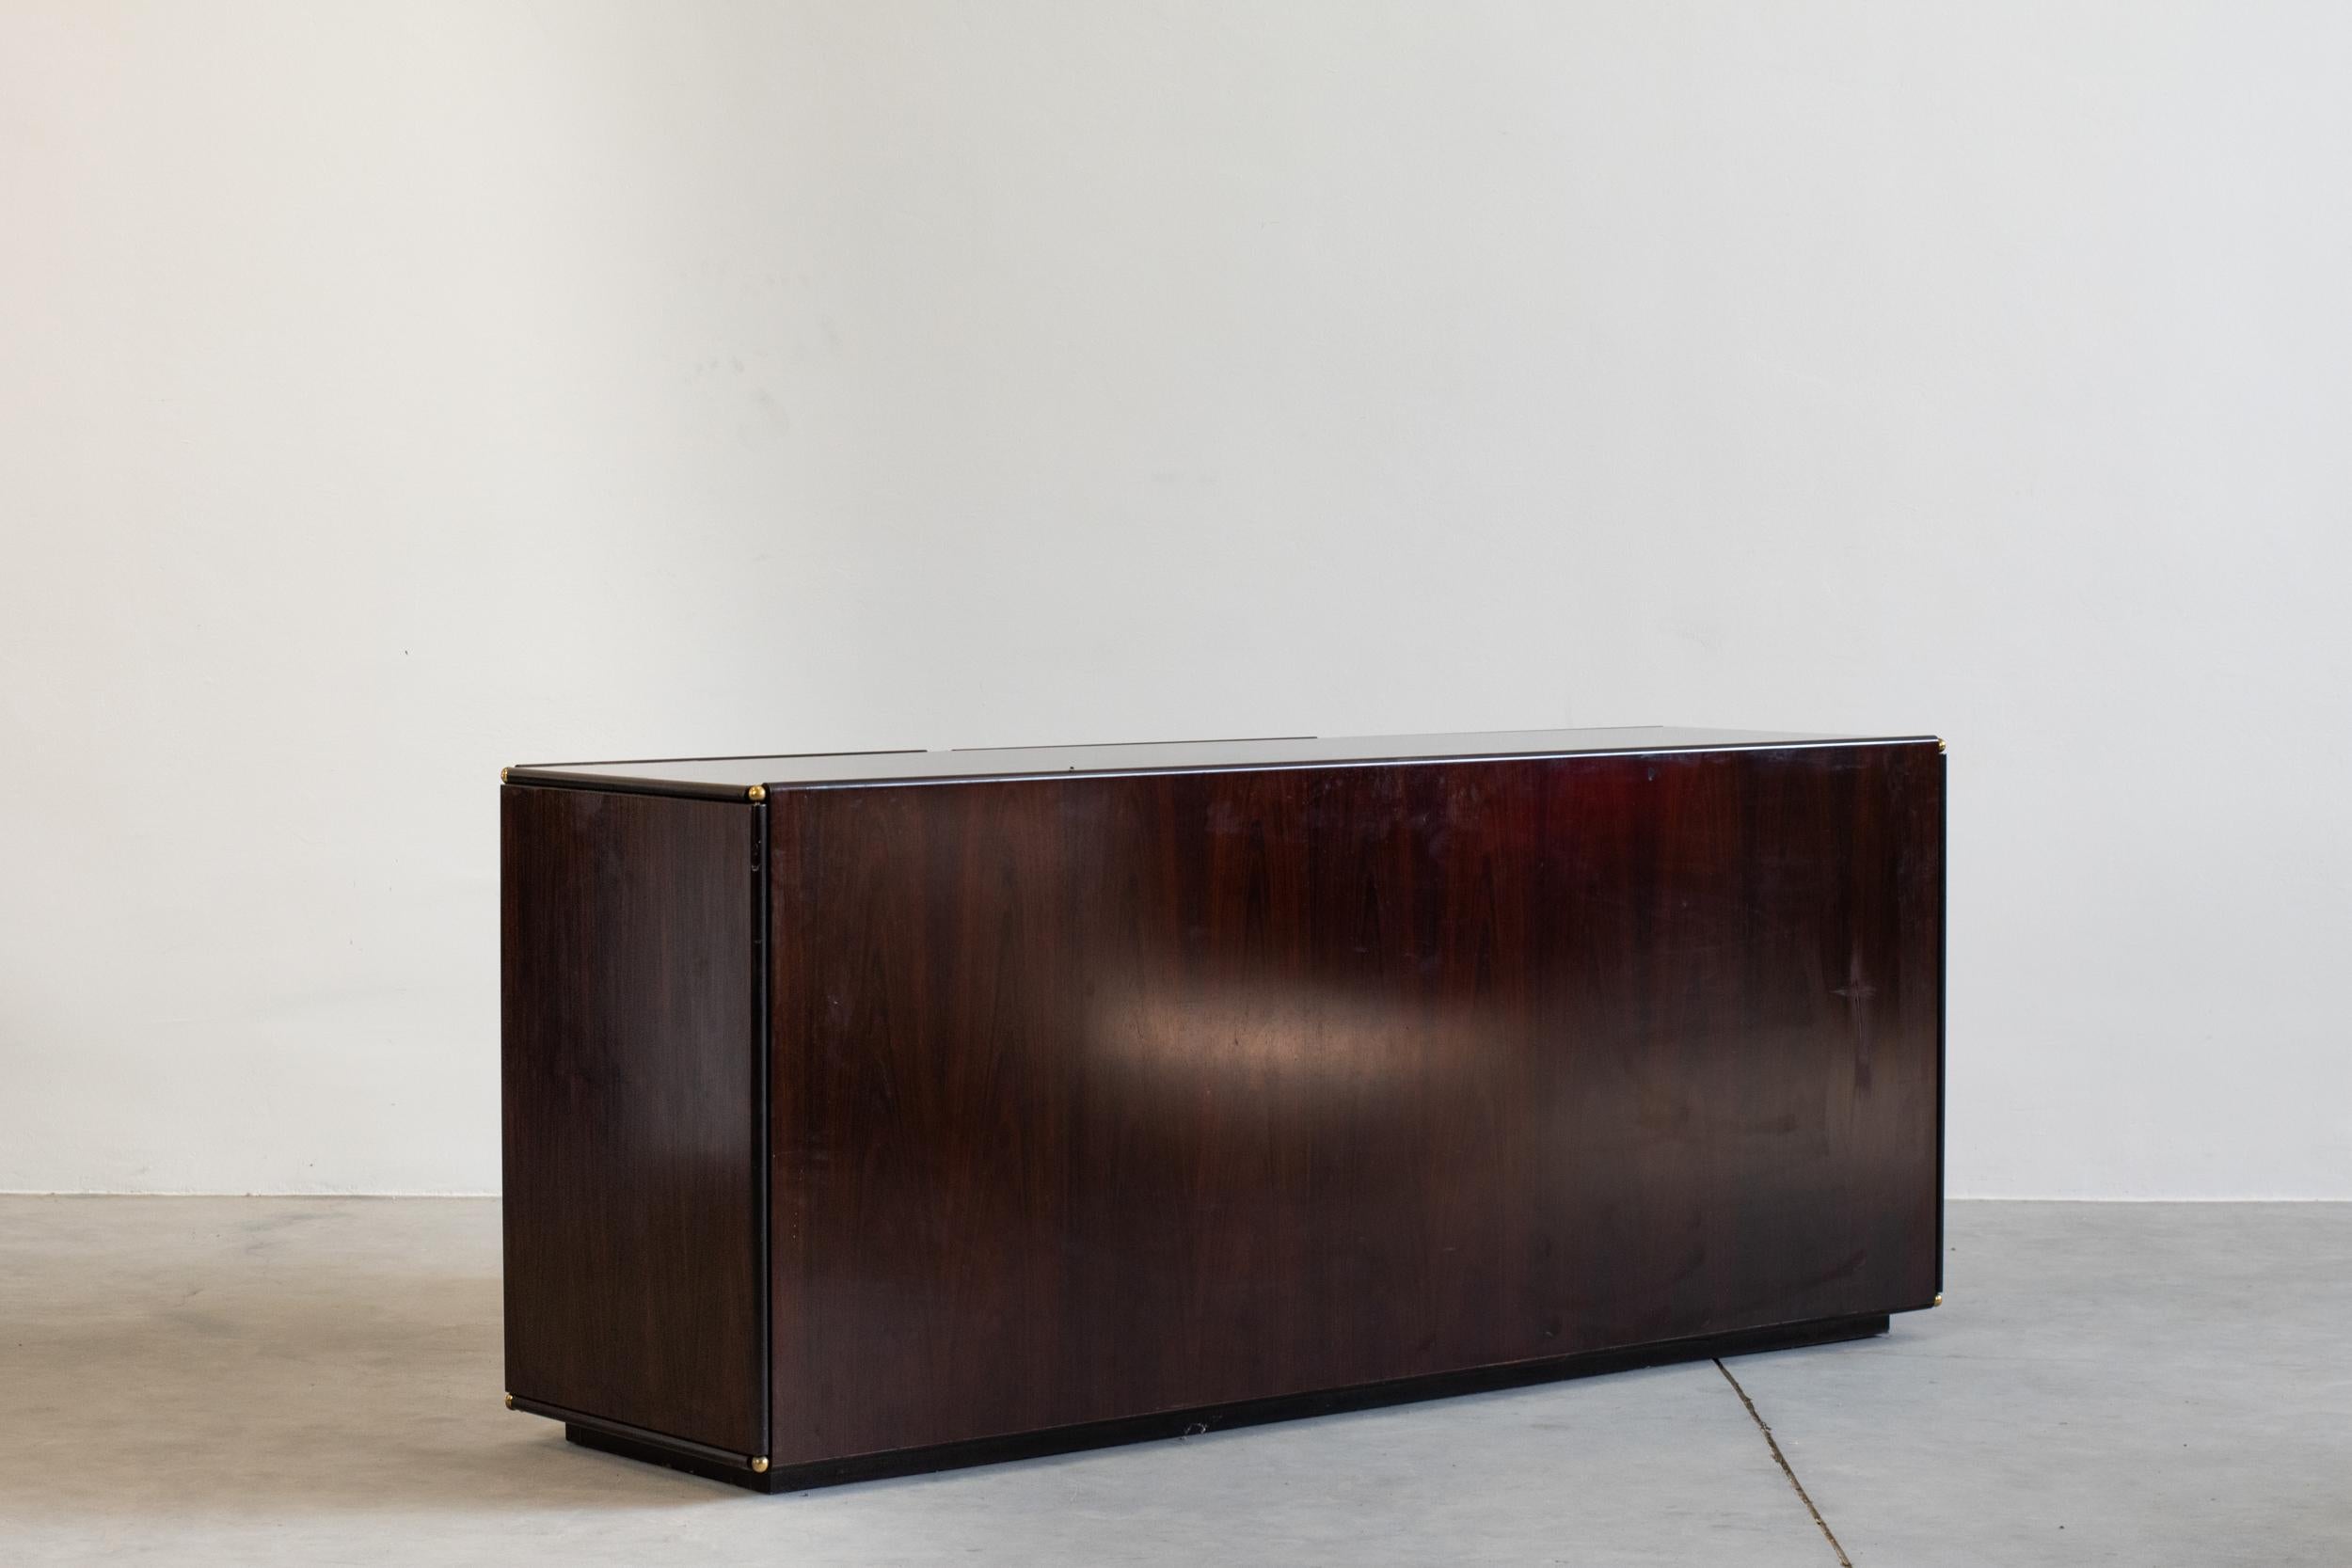 Midcentury Rosewood Sideboard, Italian Manufacture, 1950s For Sale 1